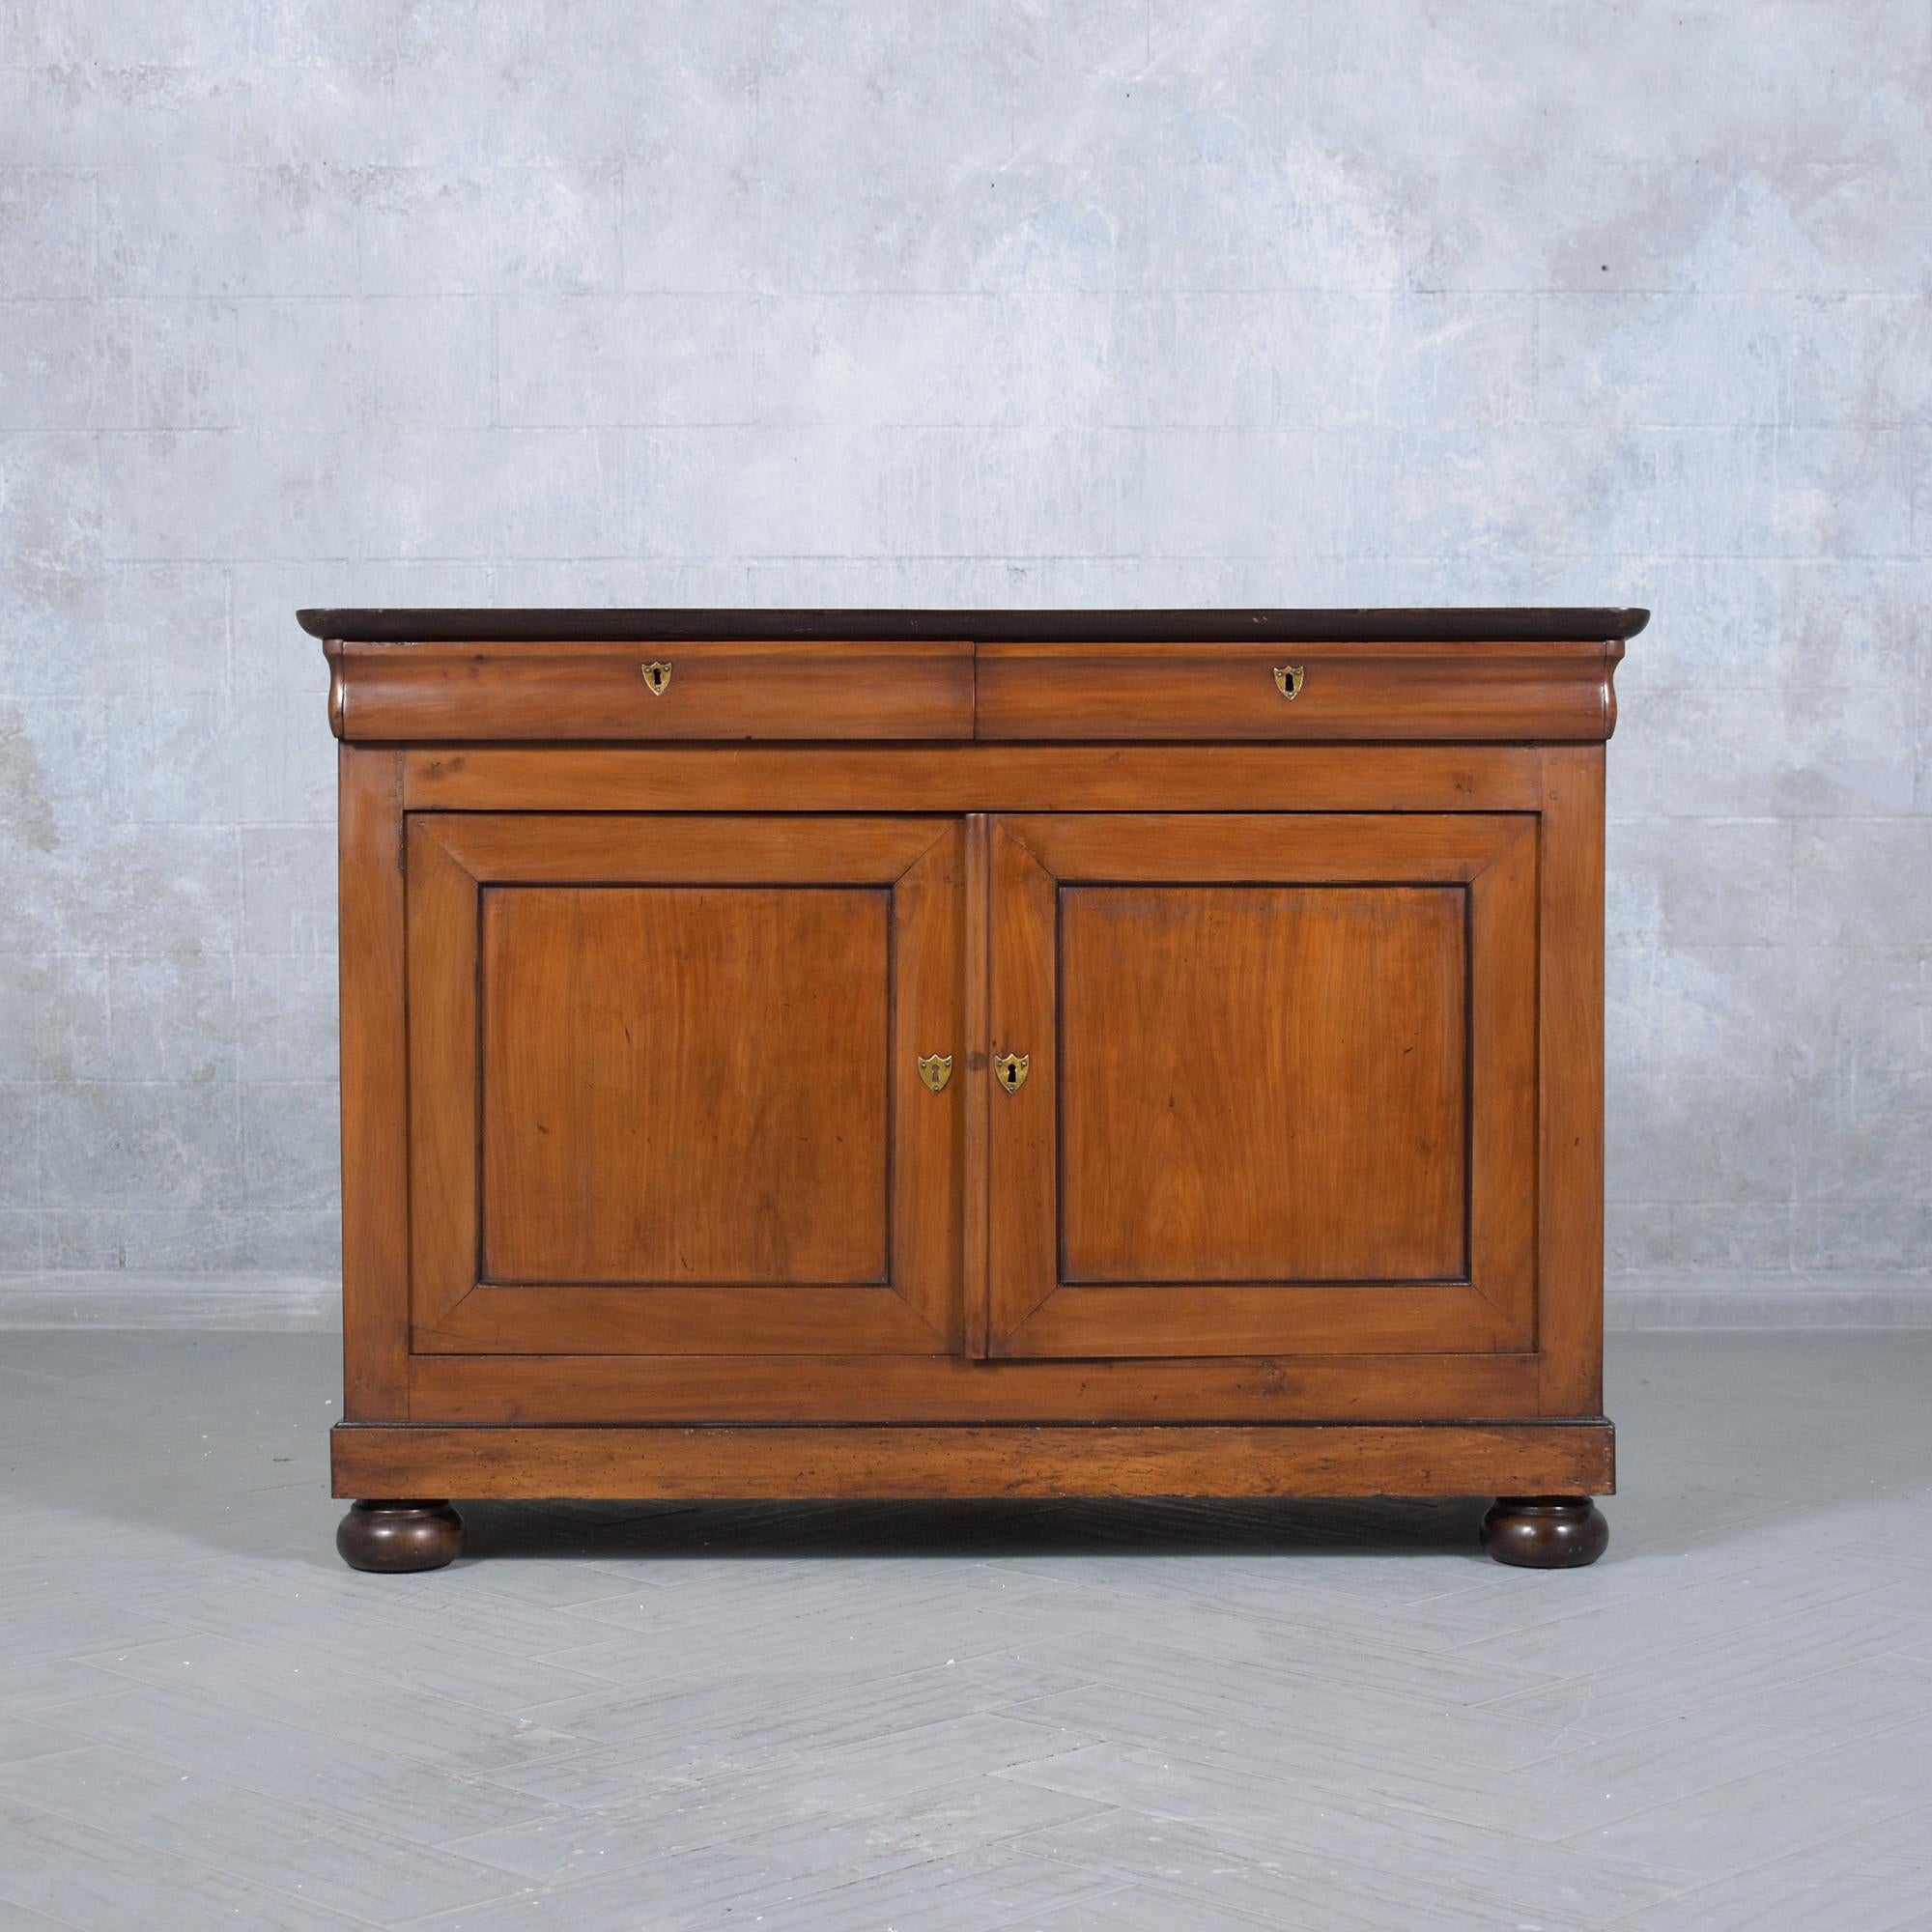 Journey back to an era of unparalleled elegance with our 19th-century French Server, a gem of antique craftsmanship and design. Expertly restored by our dedicated in-house craftsmen, this walnut wood sideboard is a living testament to the